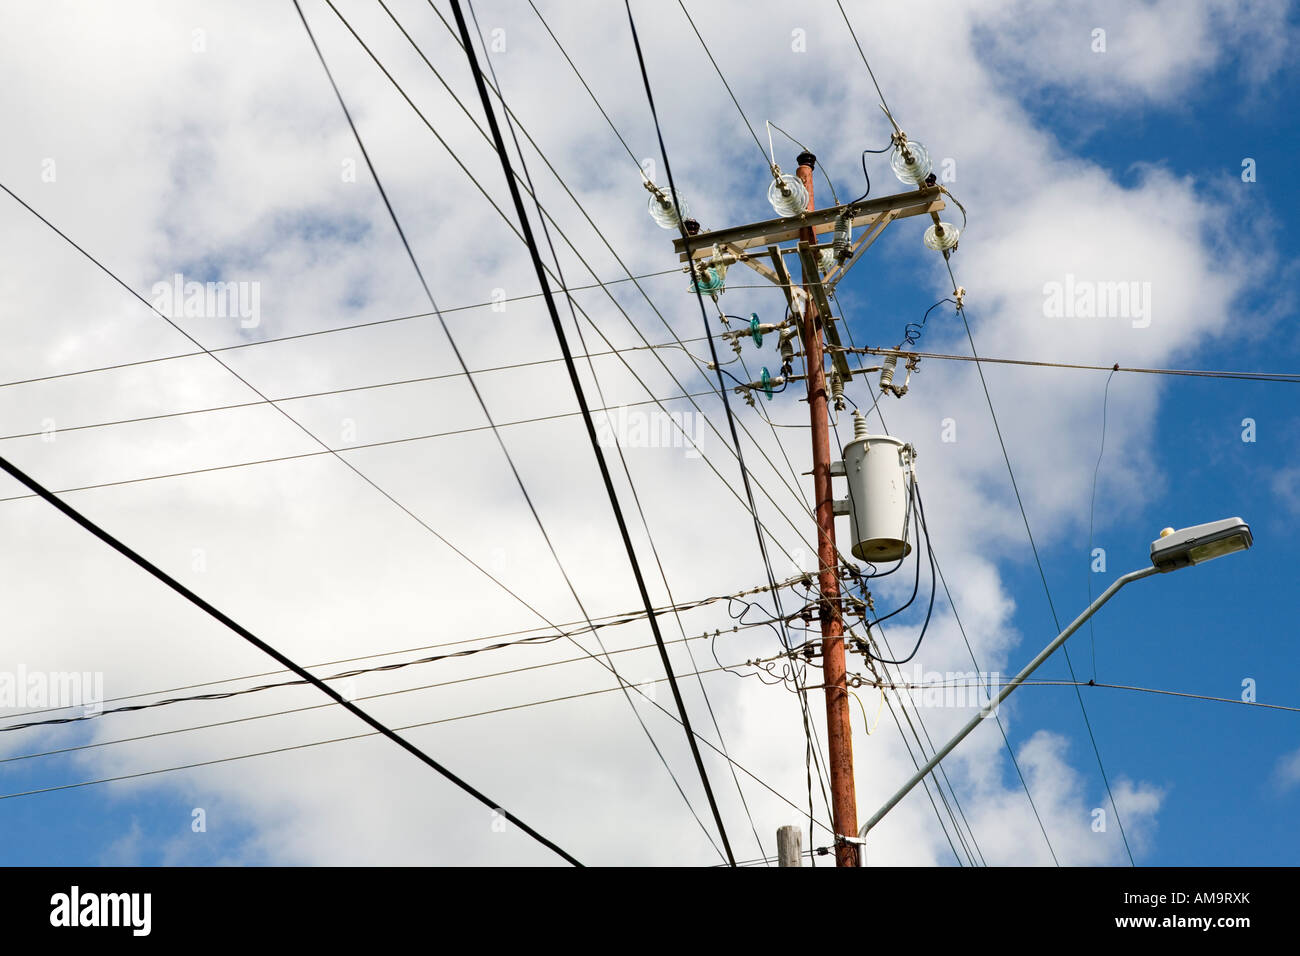 Overcrowded power lines against blue sunny skies, Tobago Island Caribbean. Stock Photo